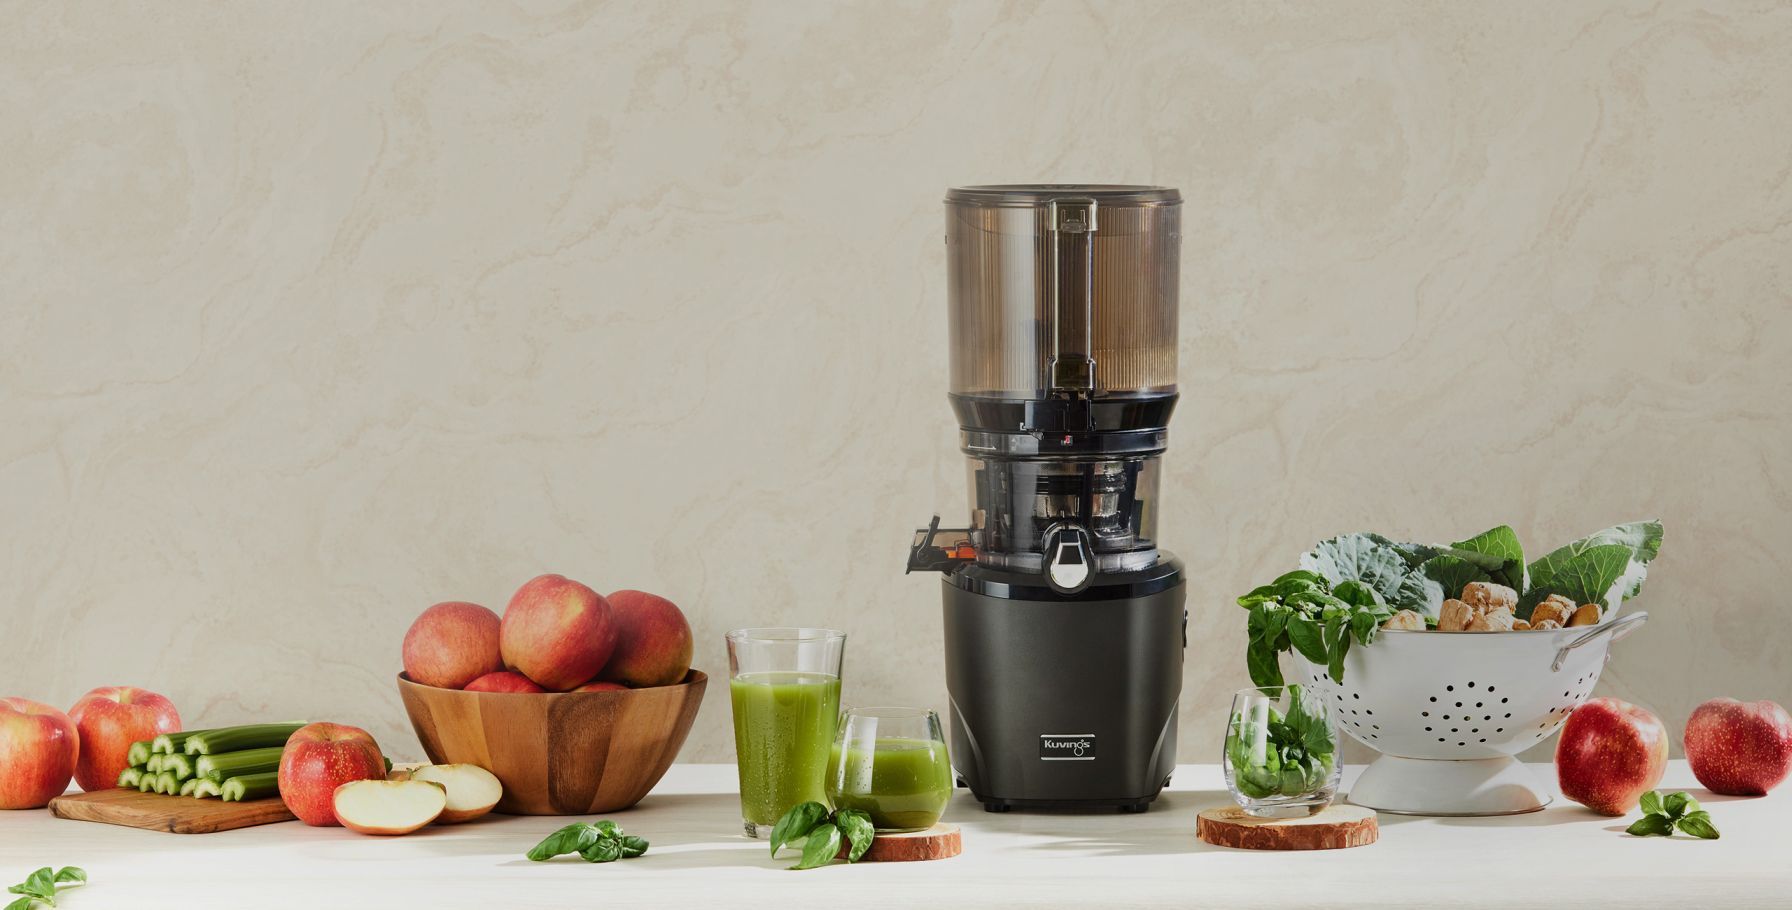 Kuvings AUTO 10 Hands-Free Slow Juicer